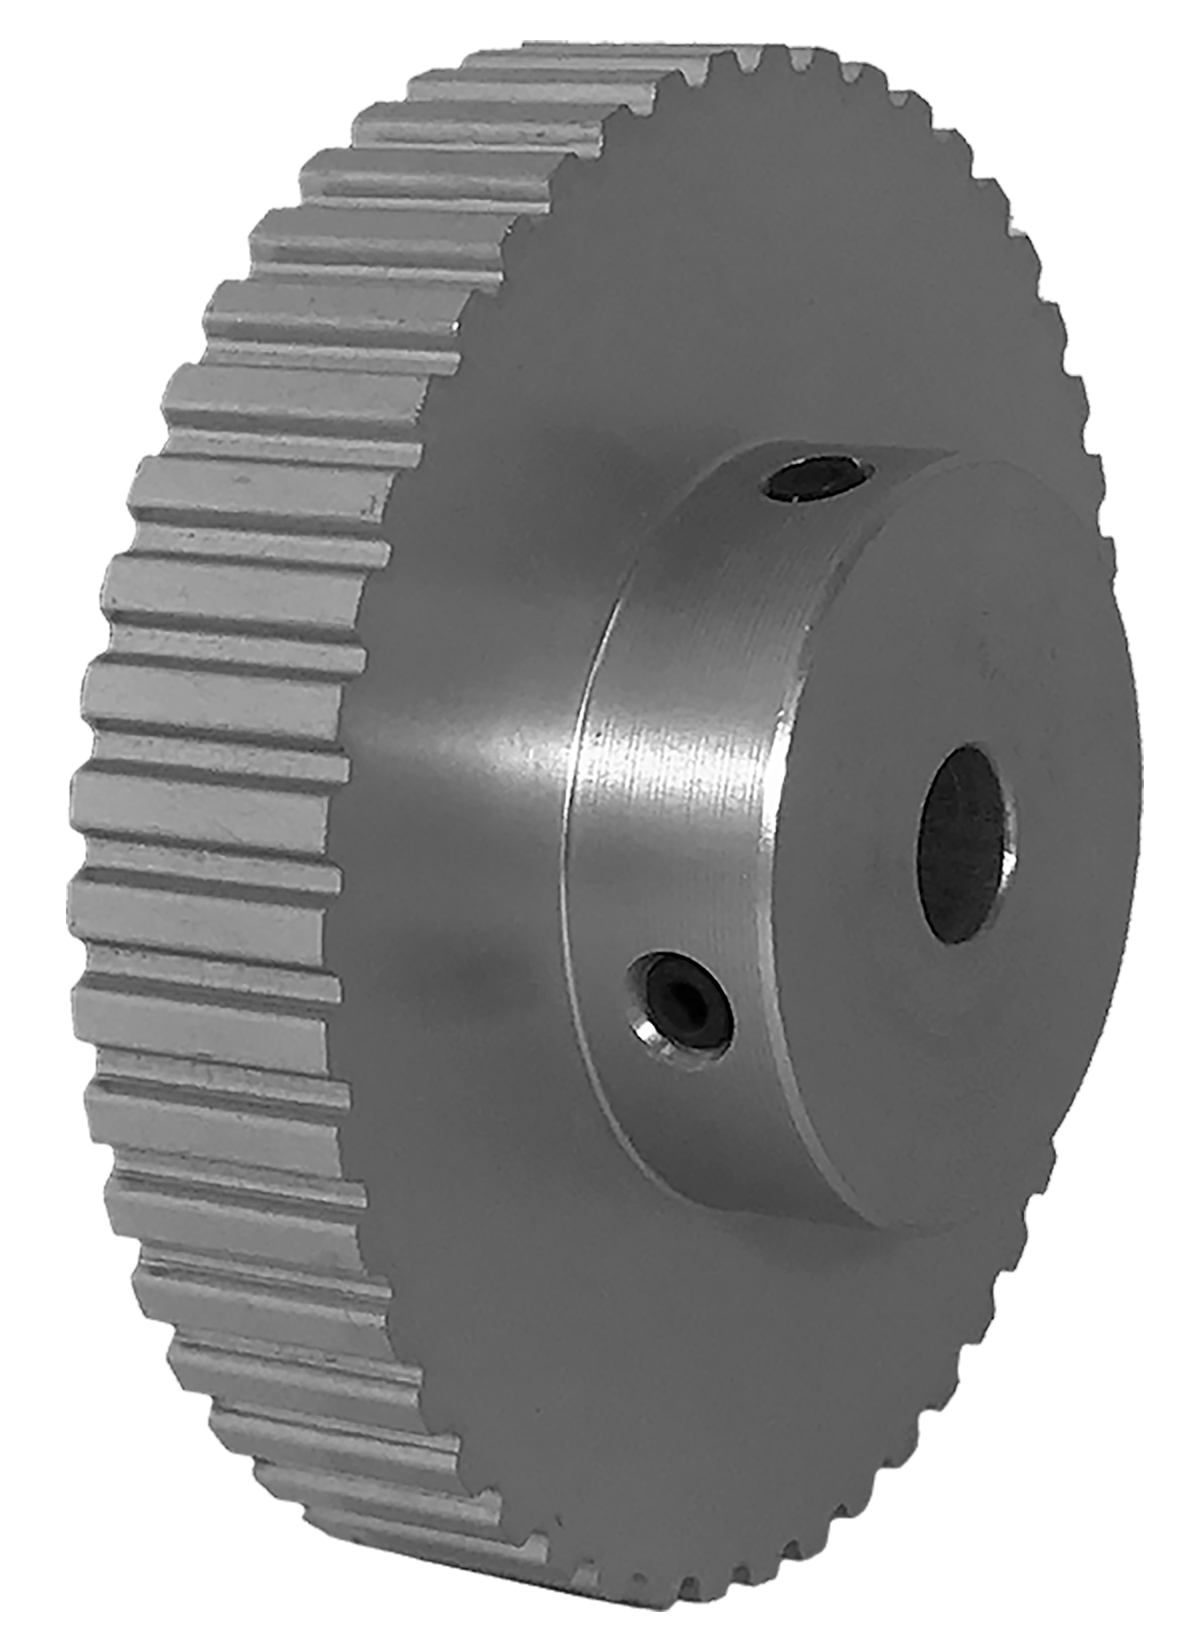 48XL037-6A5 - Aluminum Imperial Pitch Pulleys